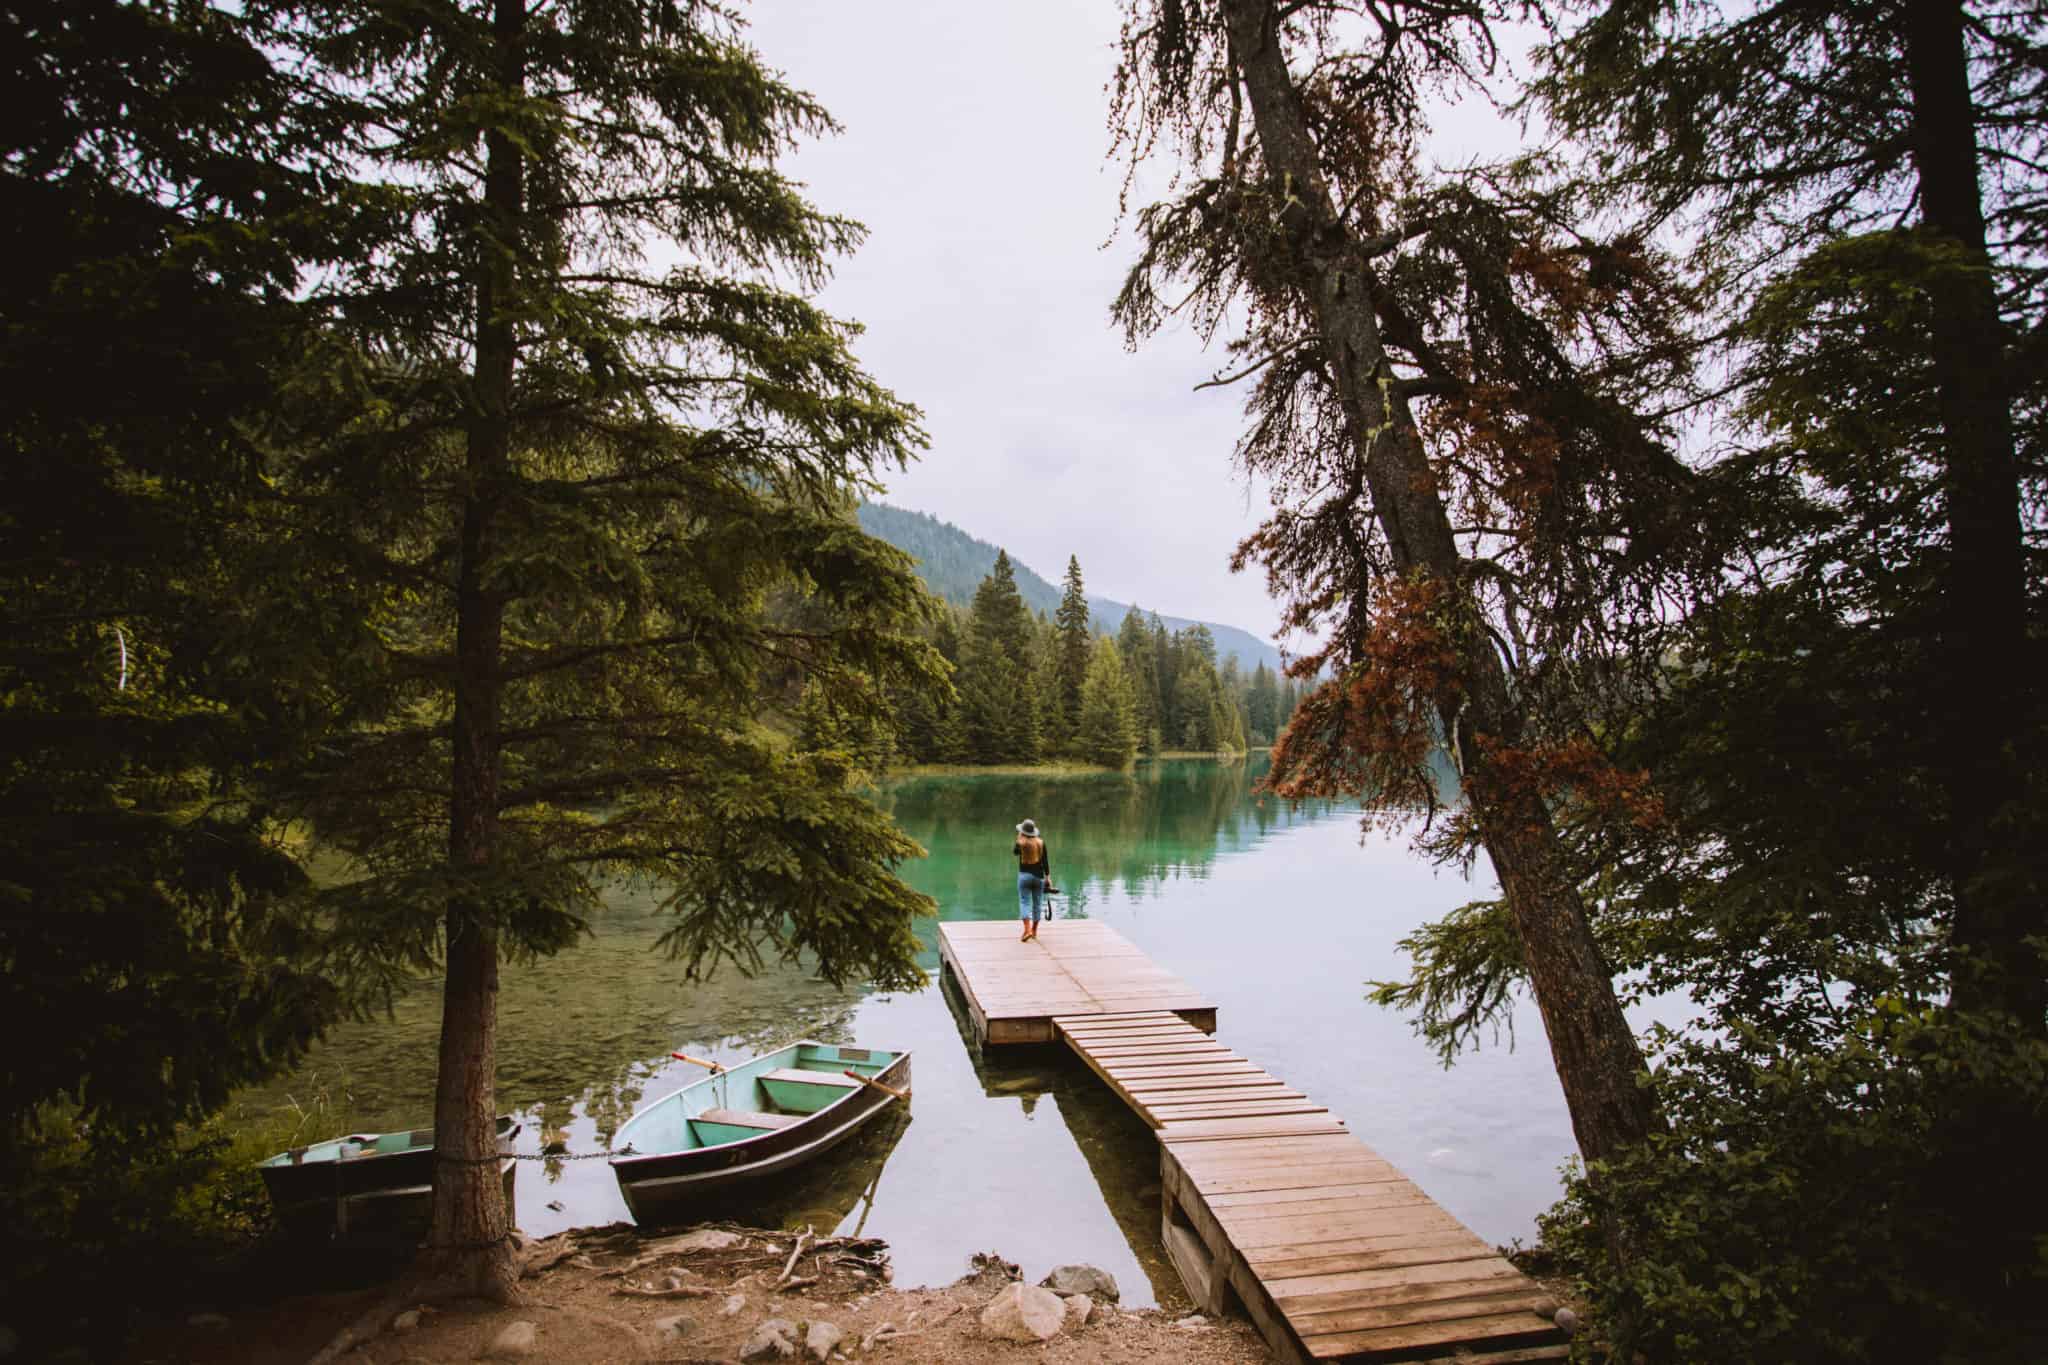 Photo Spots In Jasper National Park - Valley of Five Lakes